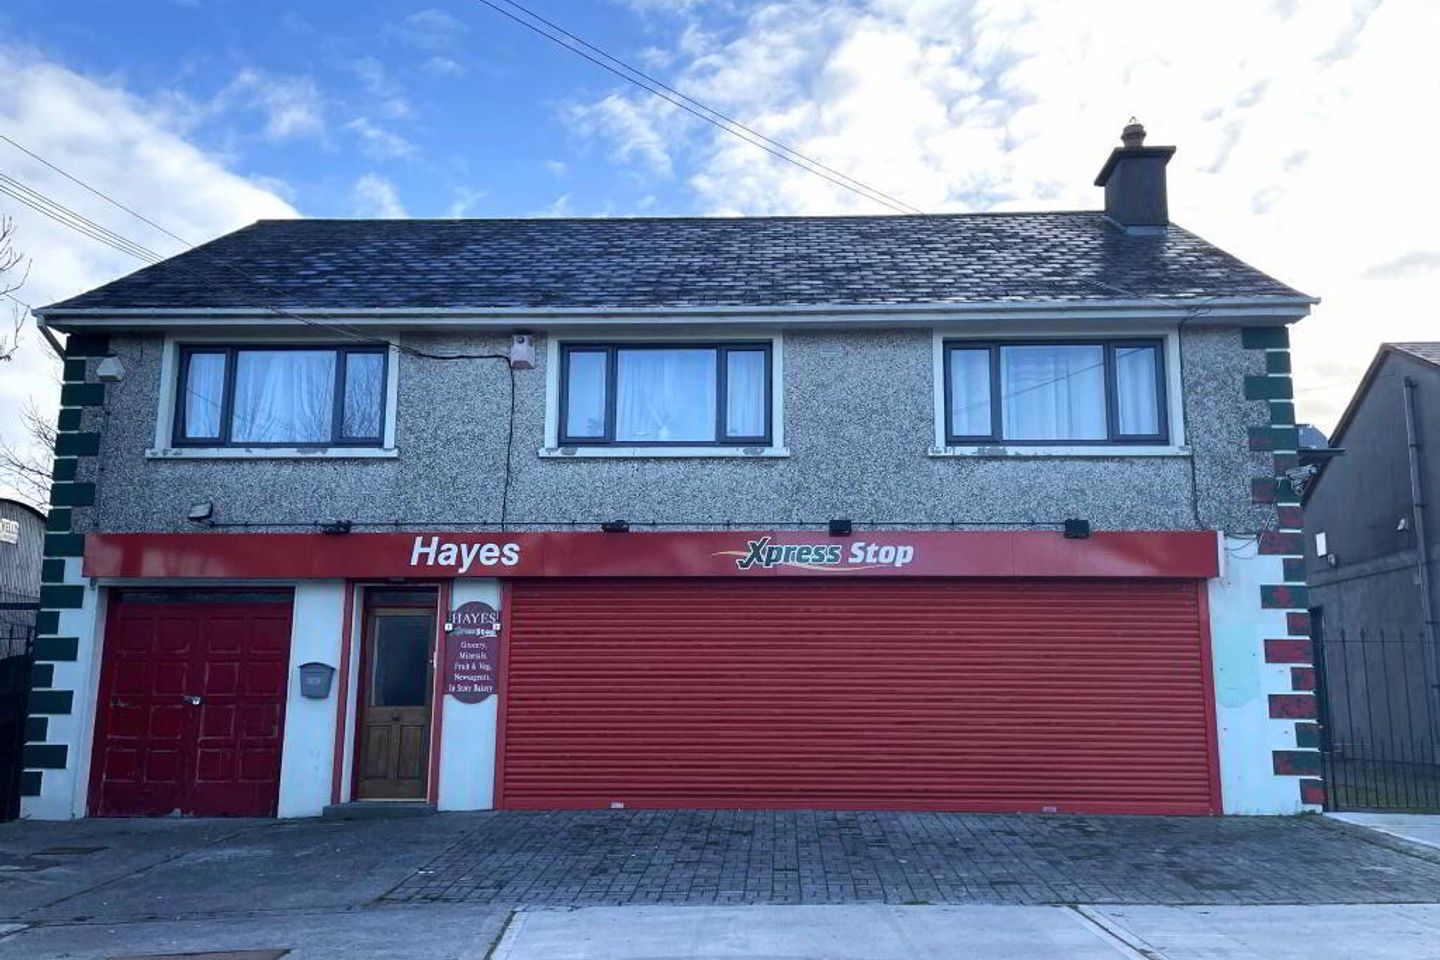 Scart, Templemore Road, Roscrea, Co. Tipperary